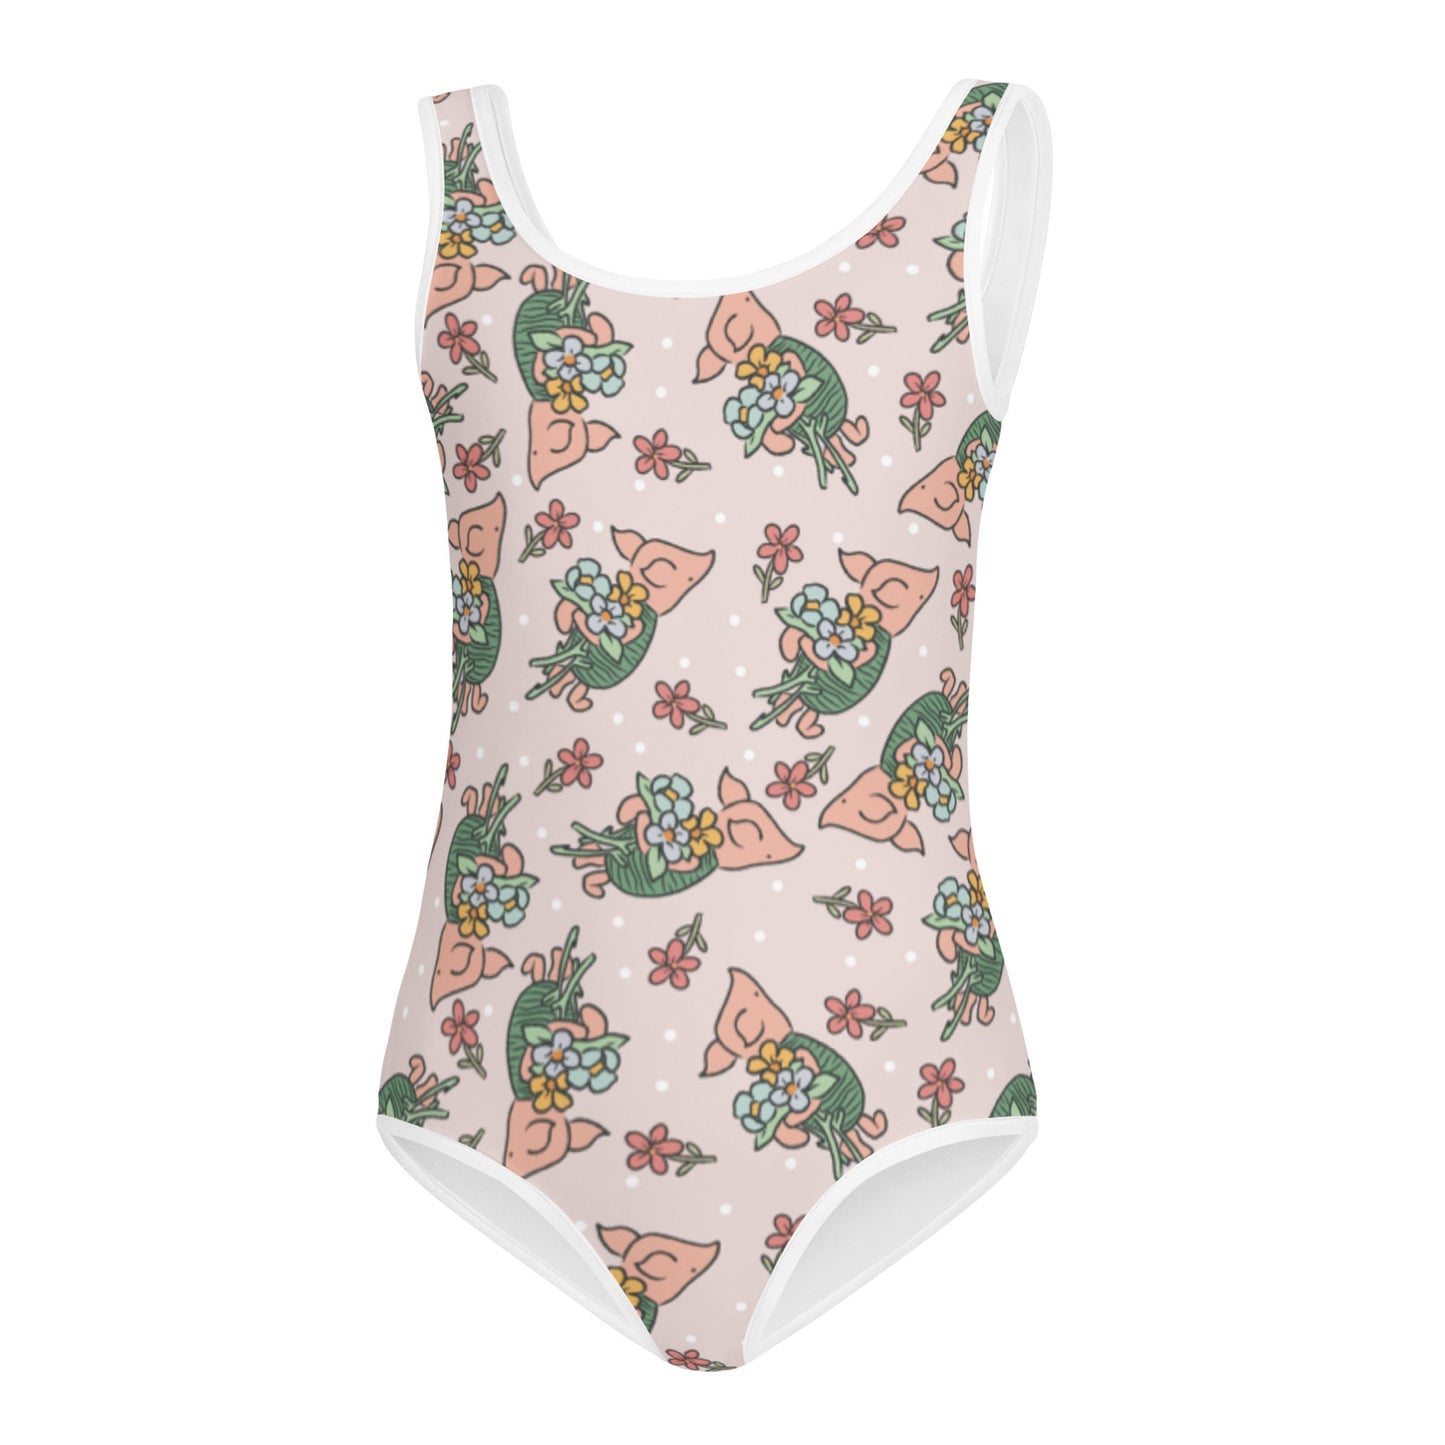 Vintage Piglet All-Over Print Kids Swimsuit happiness is addictiveLittle Lady Shay Boutique